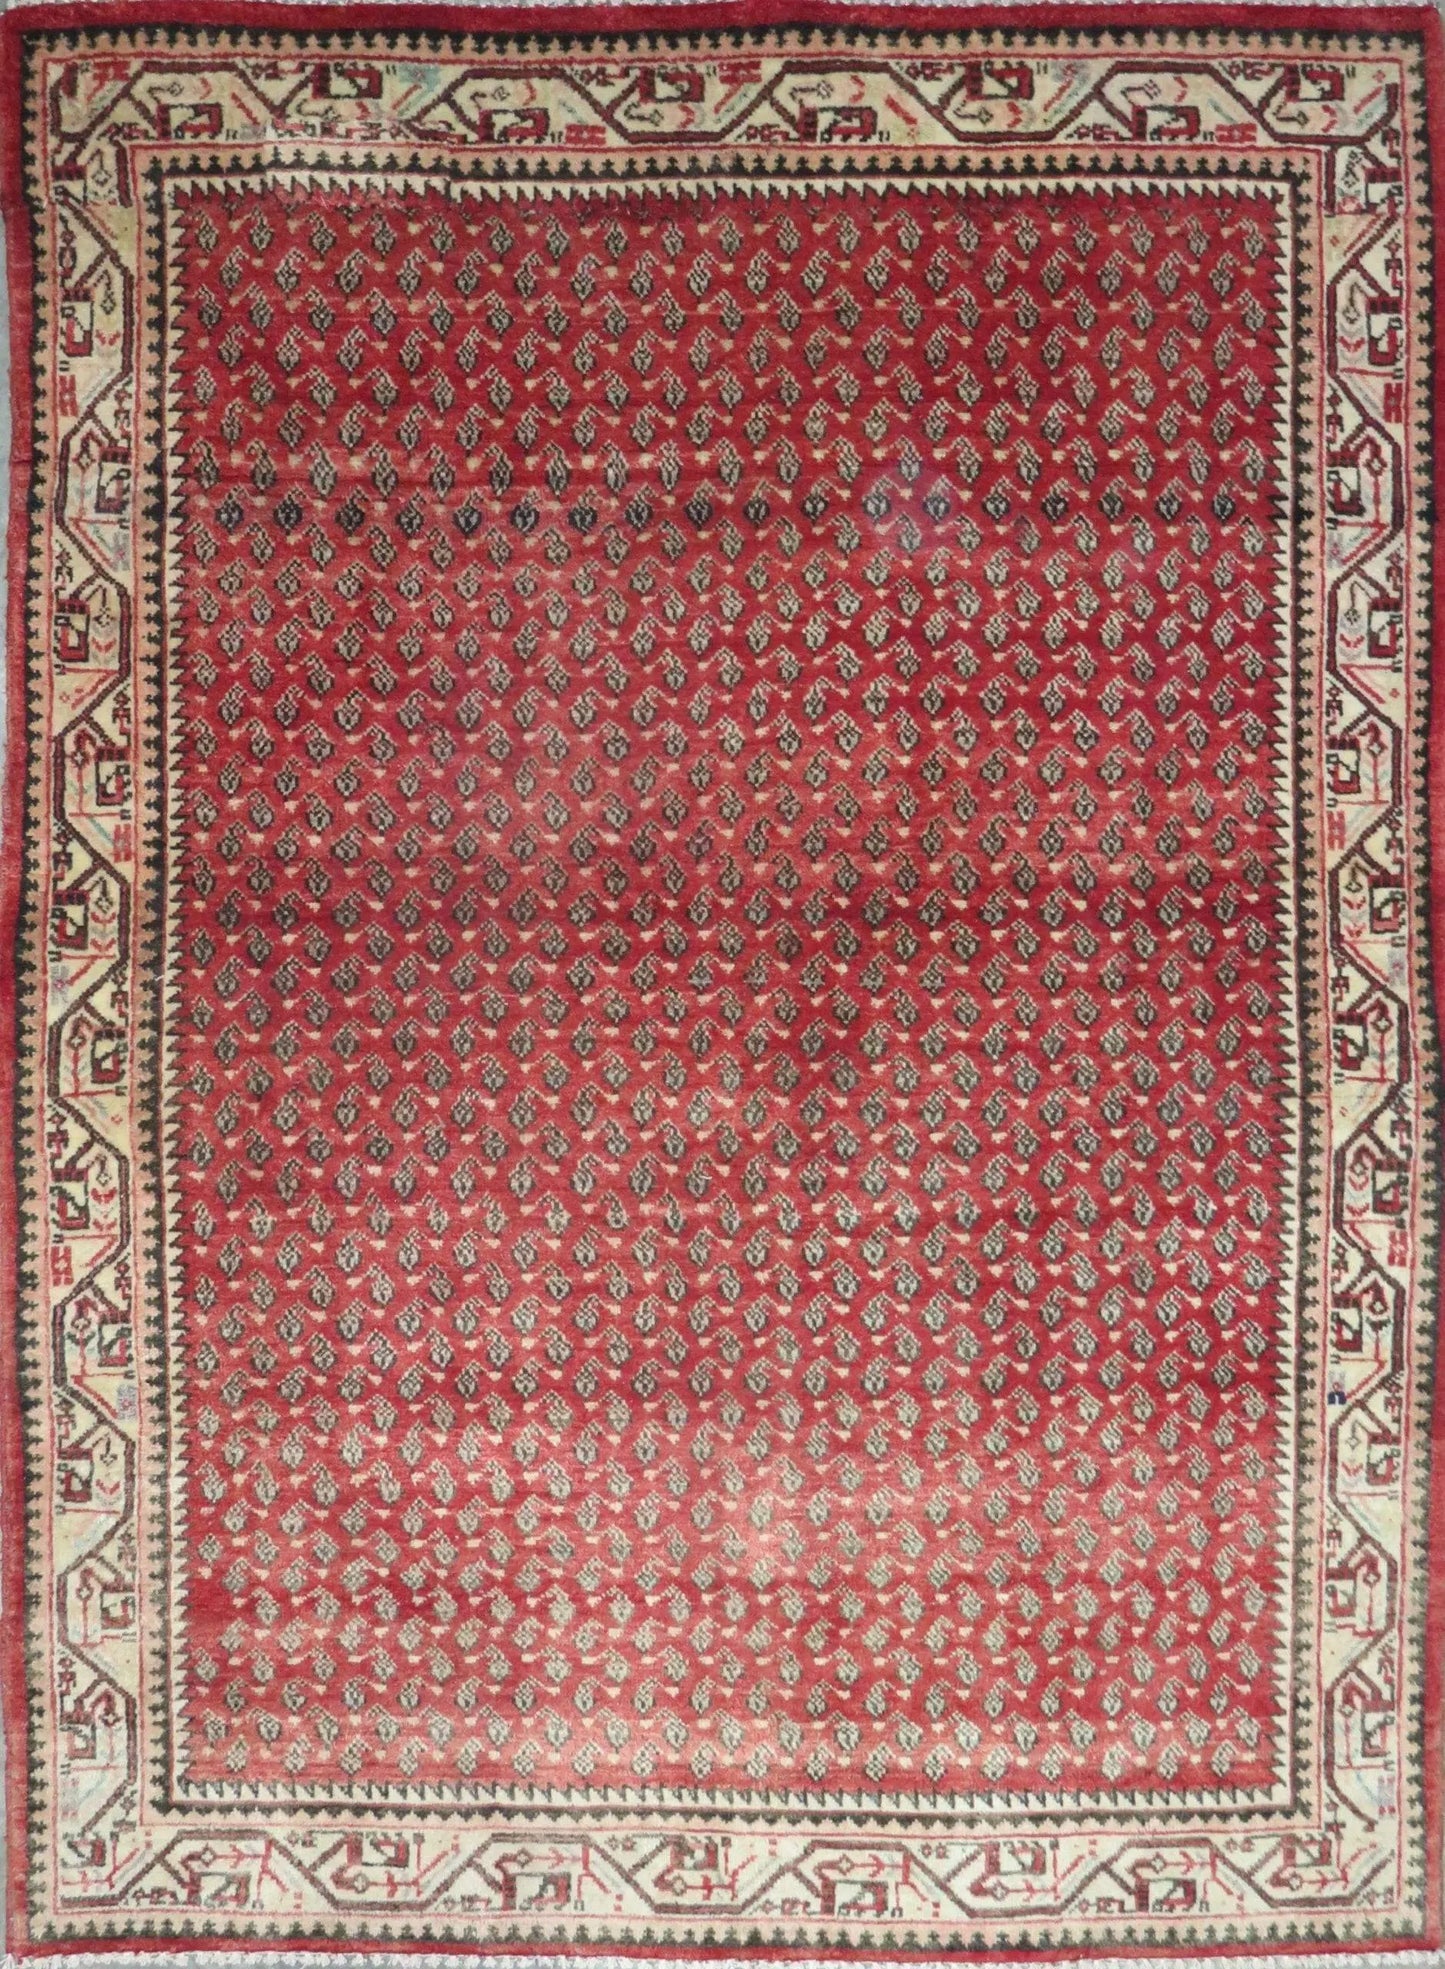 Hand-Knotted Persian Wool Rug _ Luxurious Vintage Design, 6'4" x 4'9", Artisan Crafted